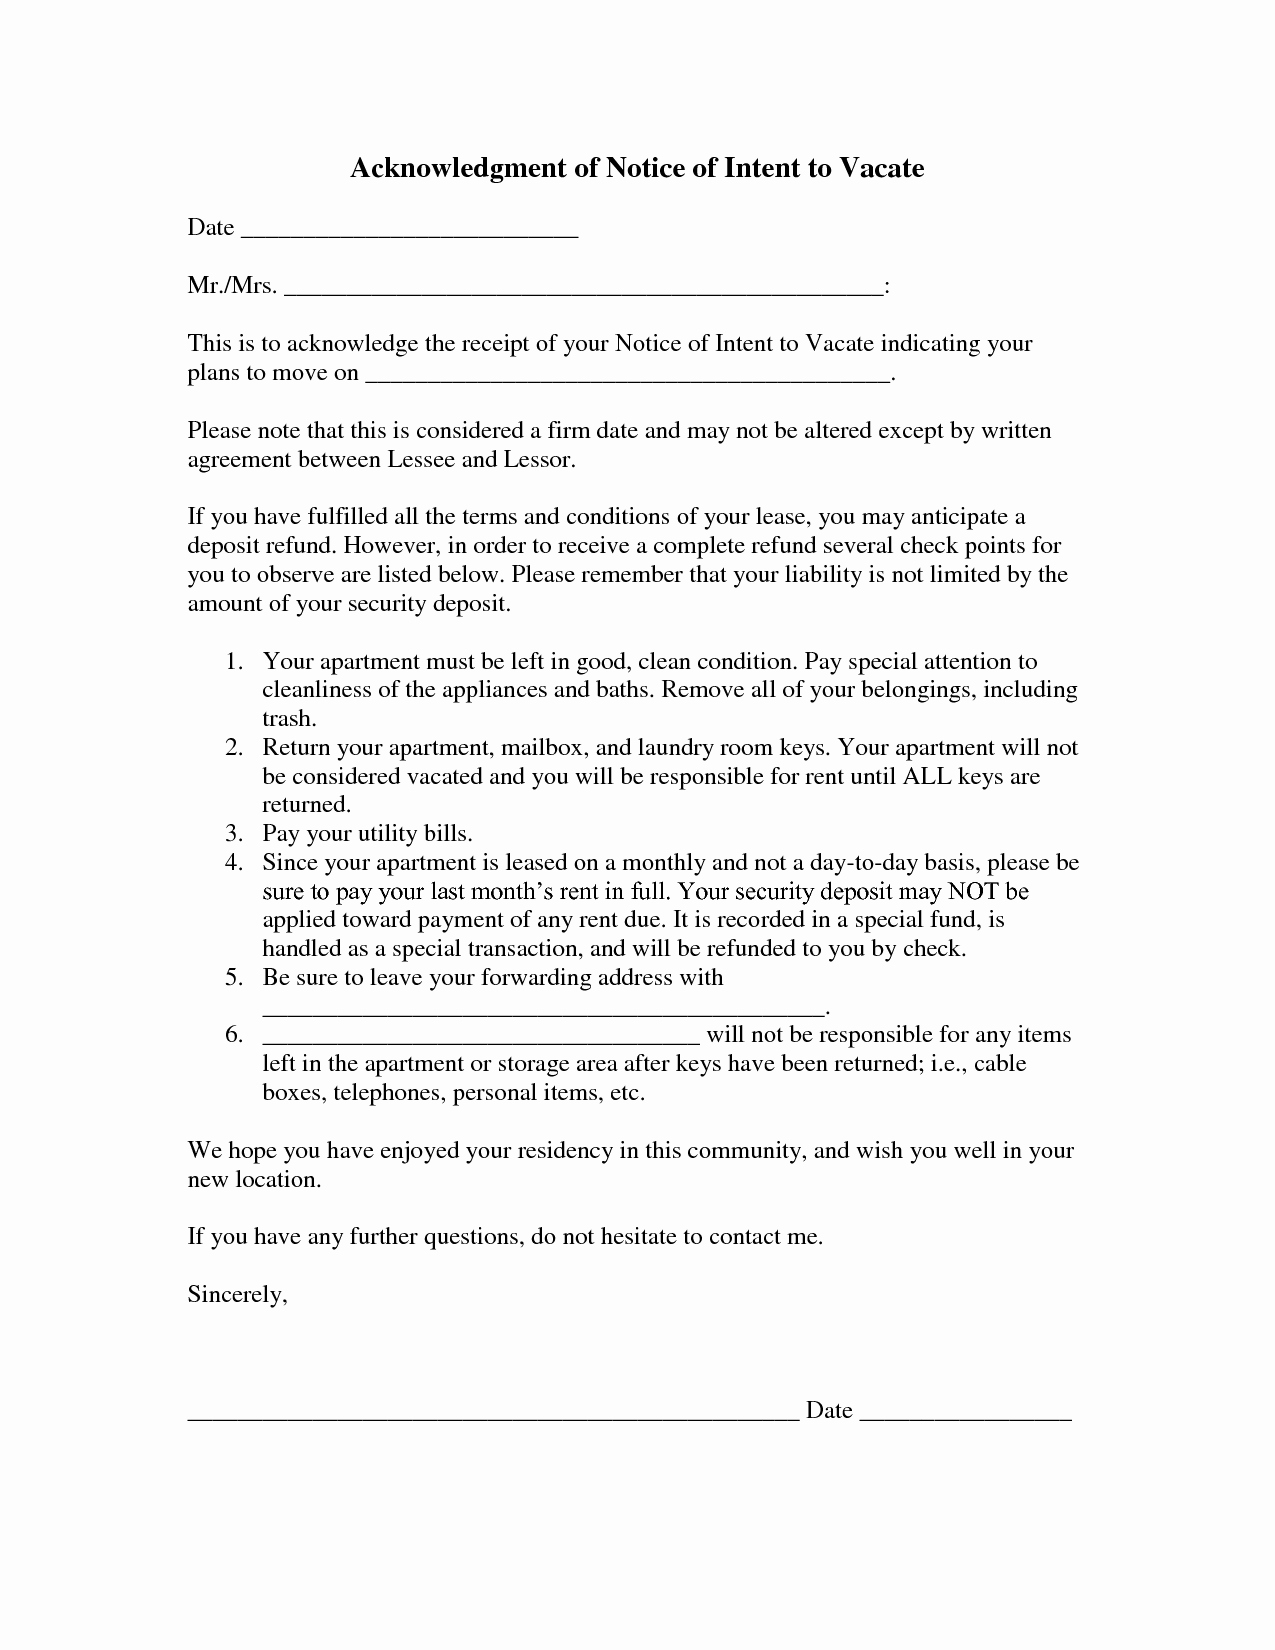 Sample Letter to Vacate Apartment Best Of Best S Of Intent to Move Out Template Sample